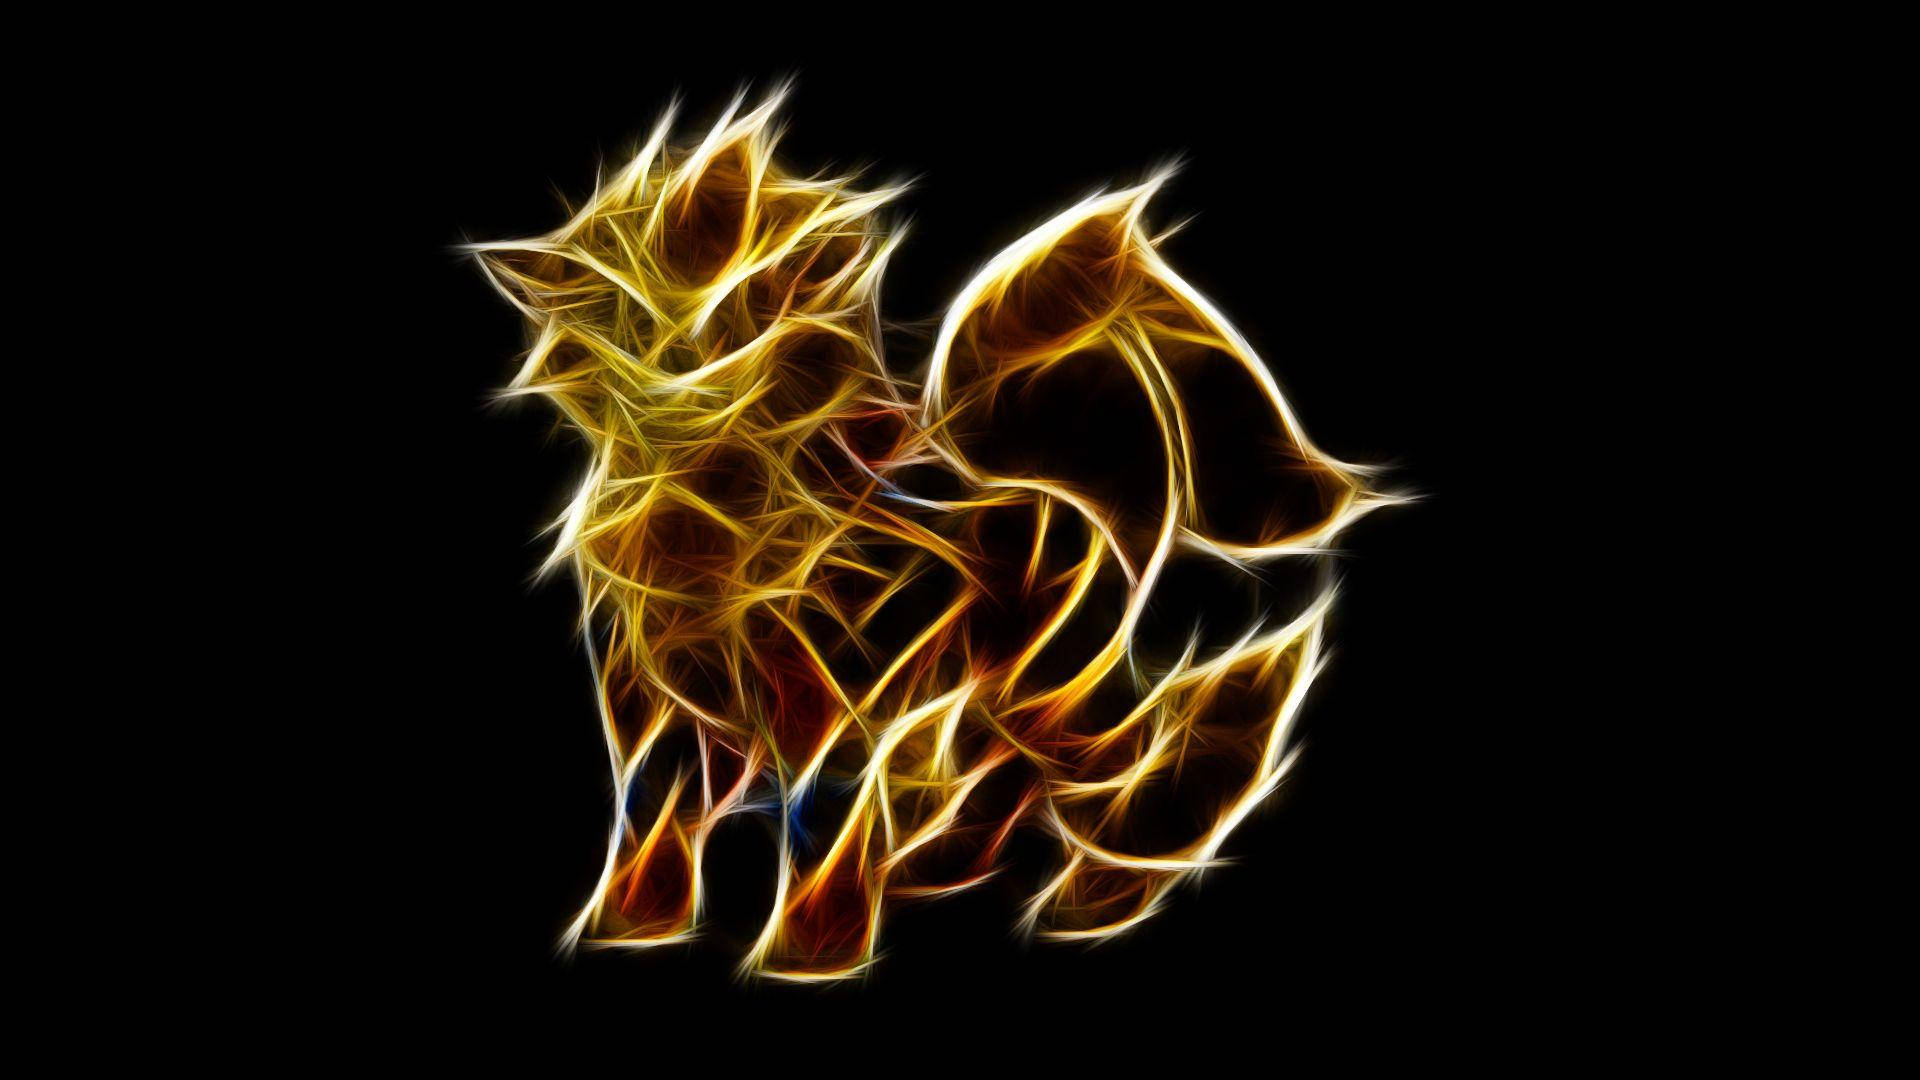 Arcanine Majestically Outlined in Flame Wallpaper